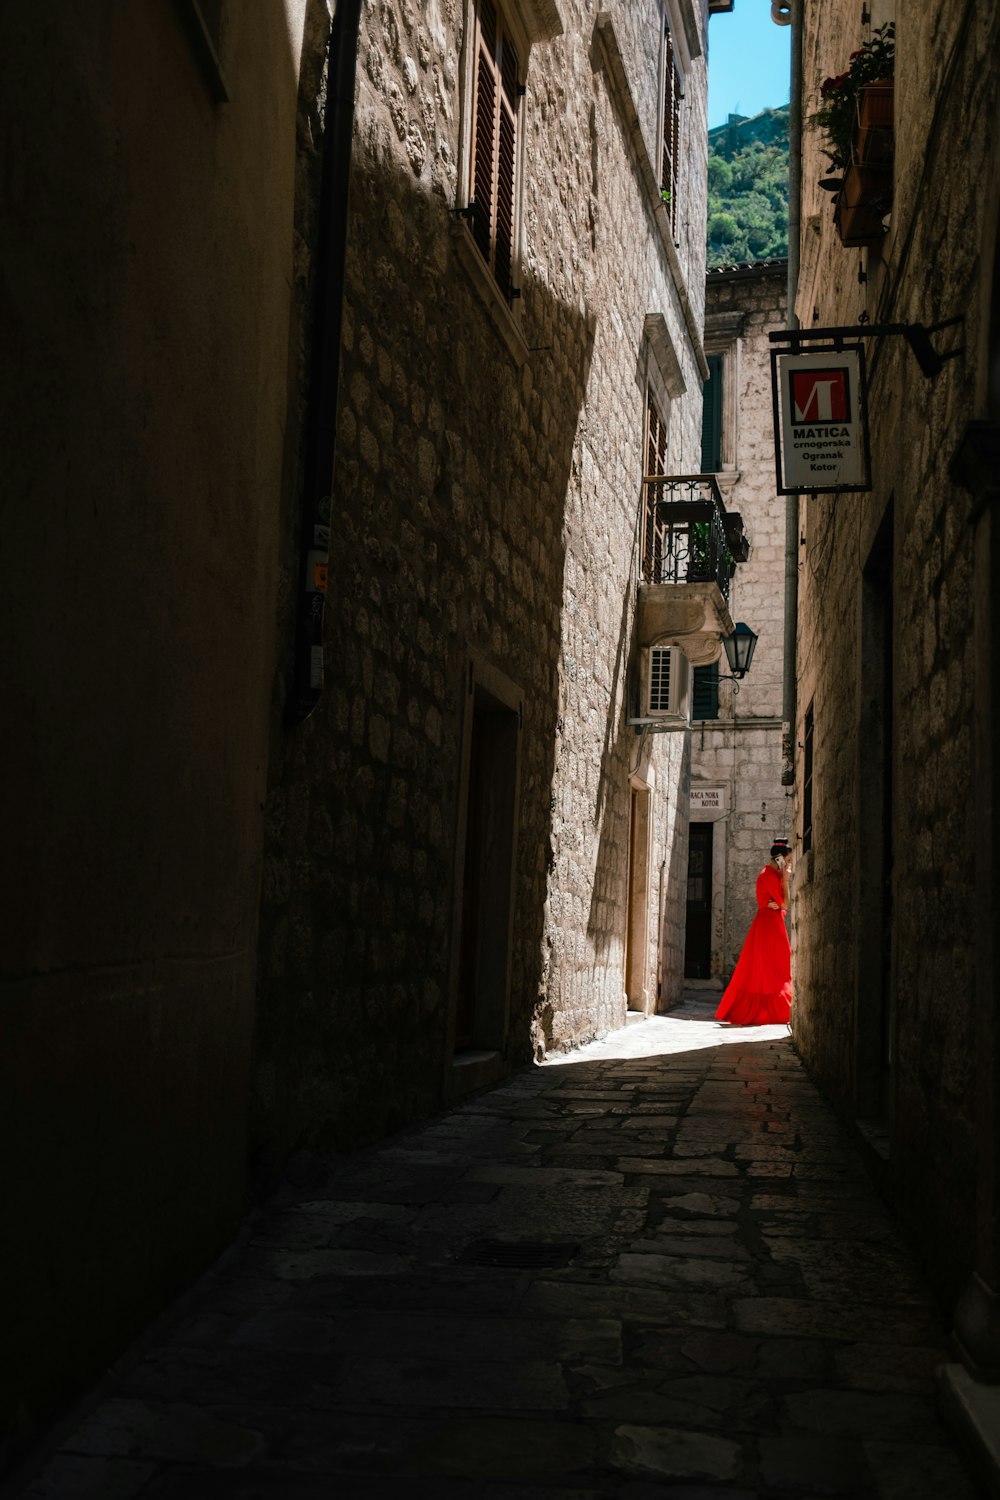 a person in a red dress walking down a narrow street